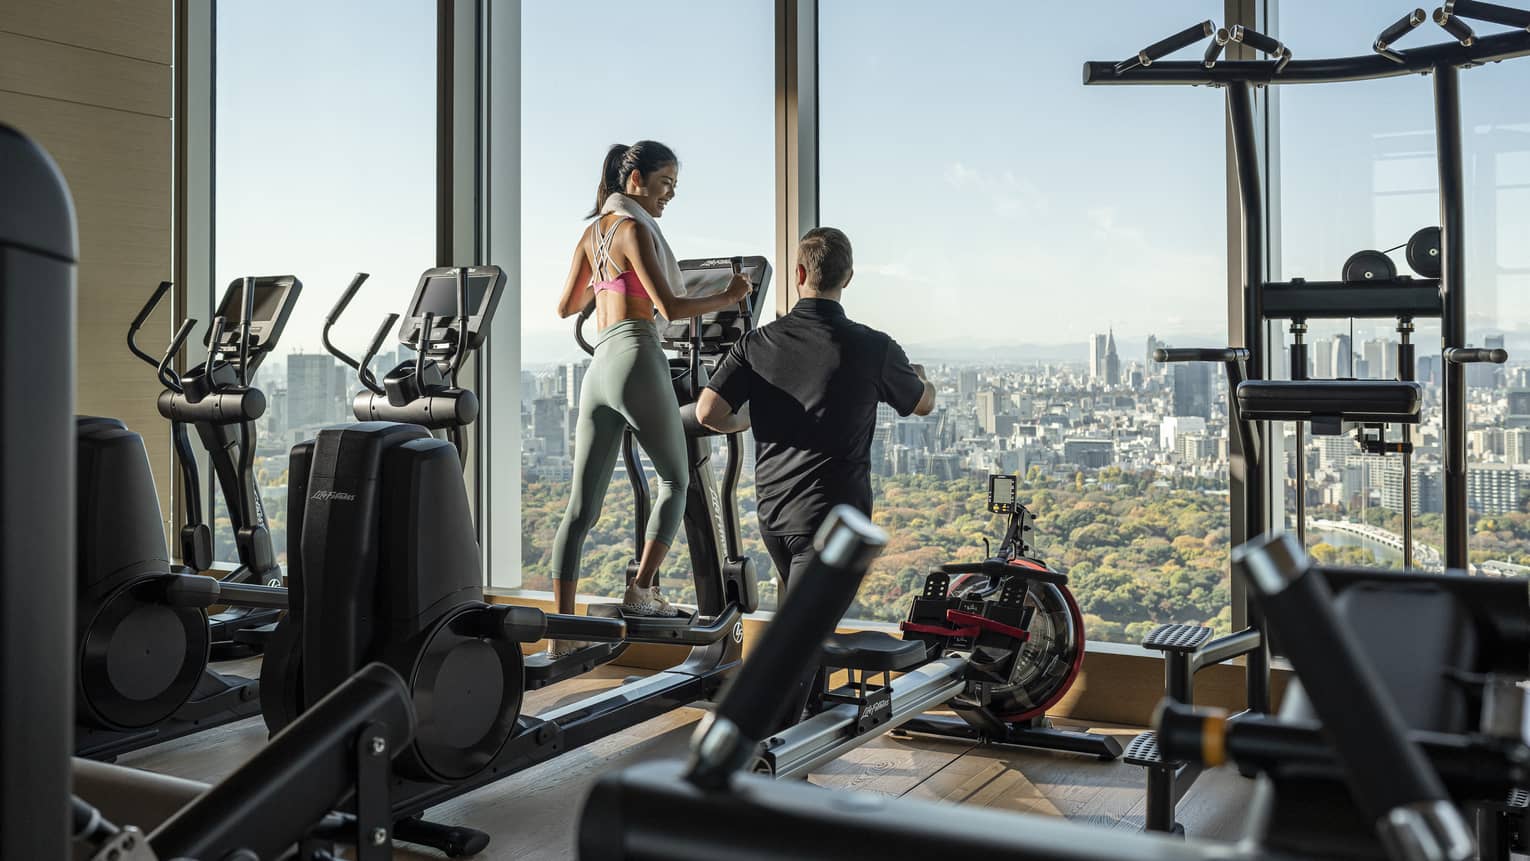 Woman trains on treadmill with male trainer, overlooking downtown Tokyo